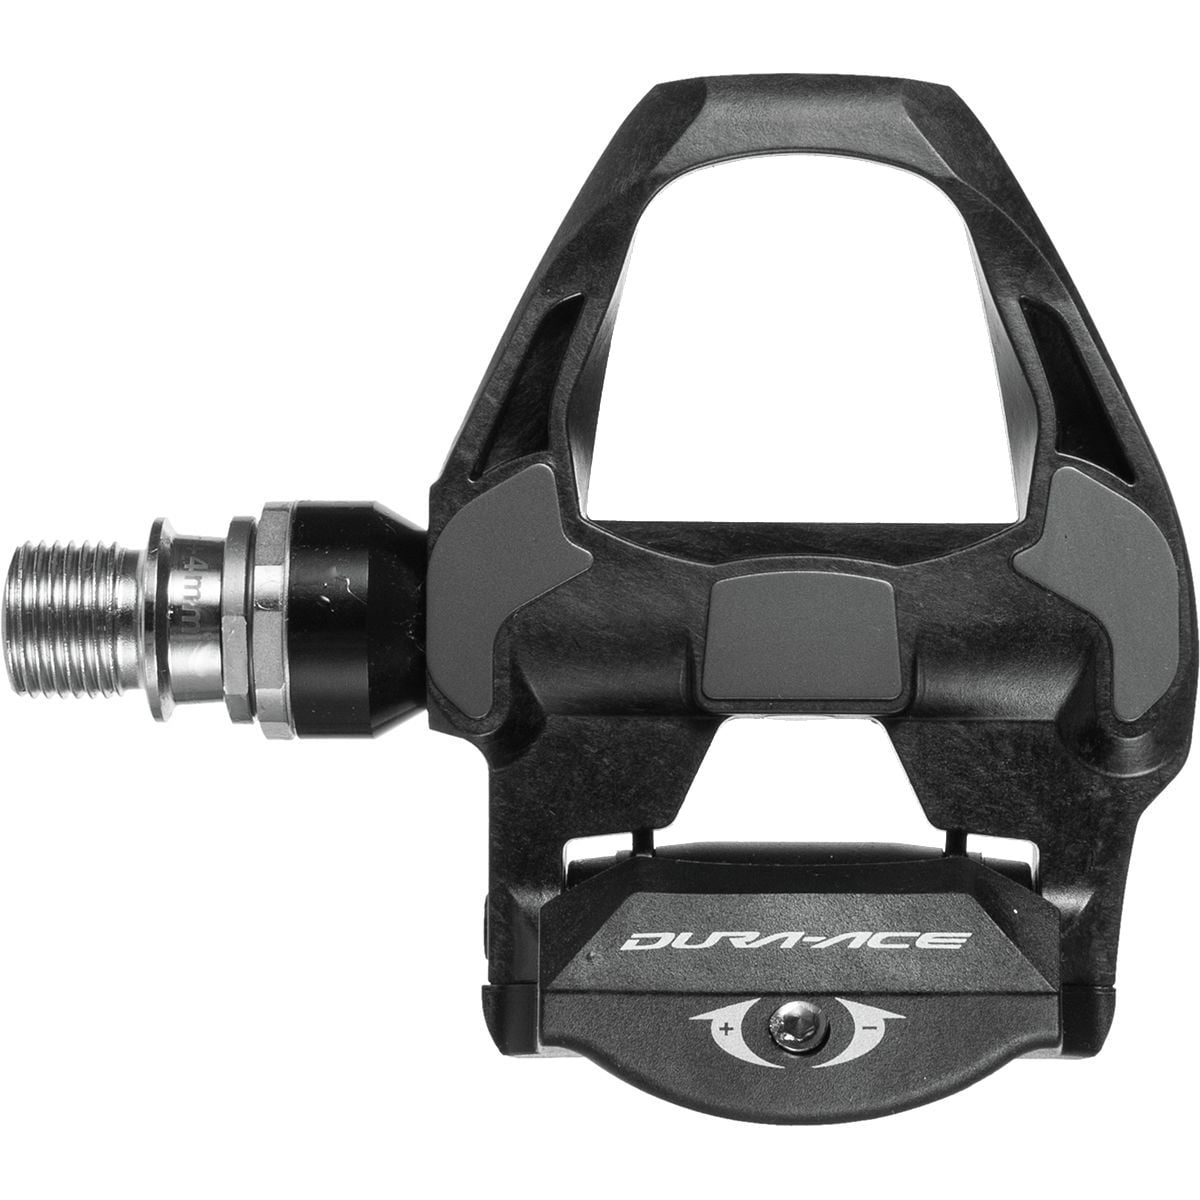 Shimano Dura-Ace PD-R9100 +4mm SPD SL Pedals